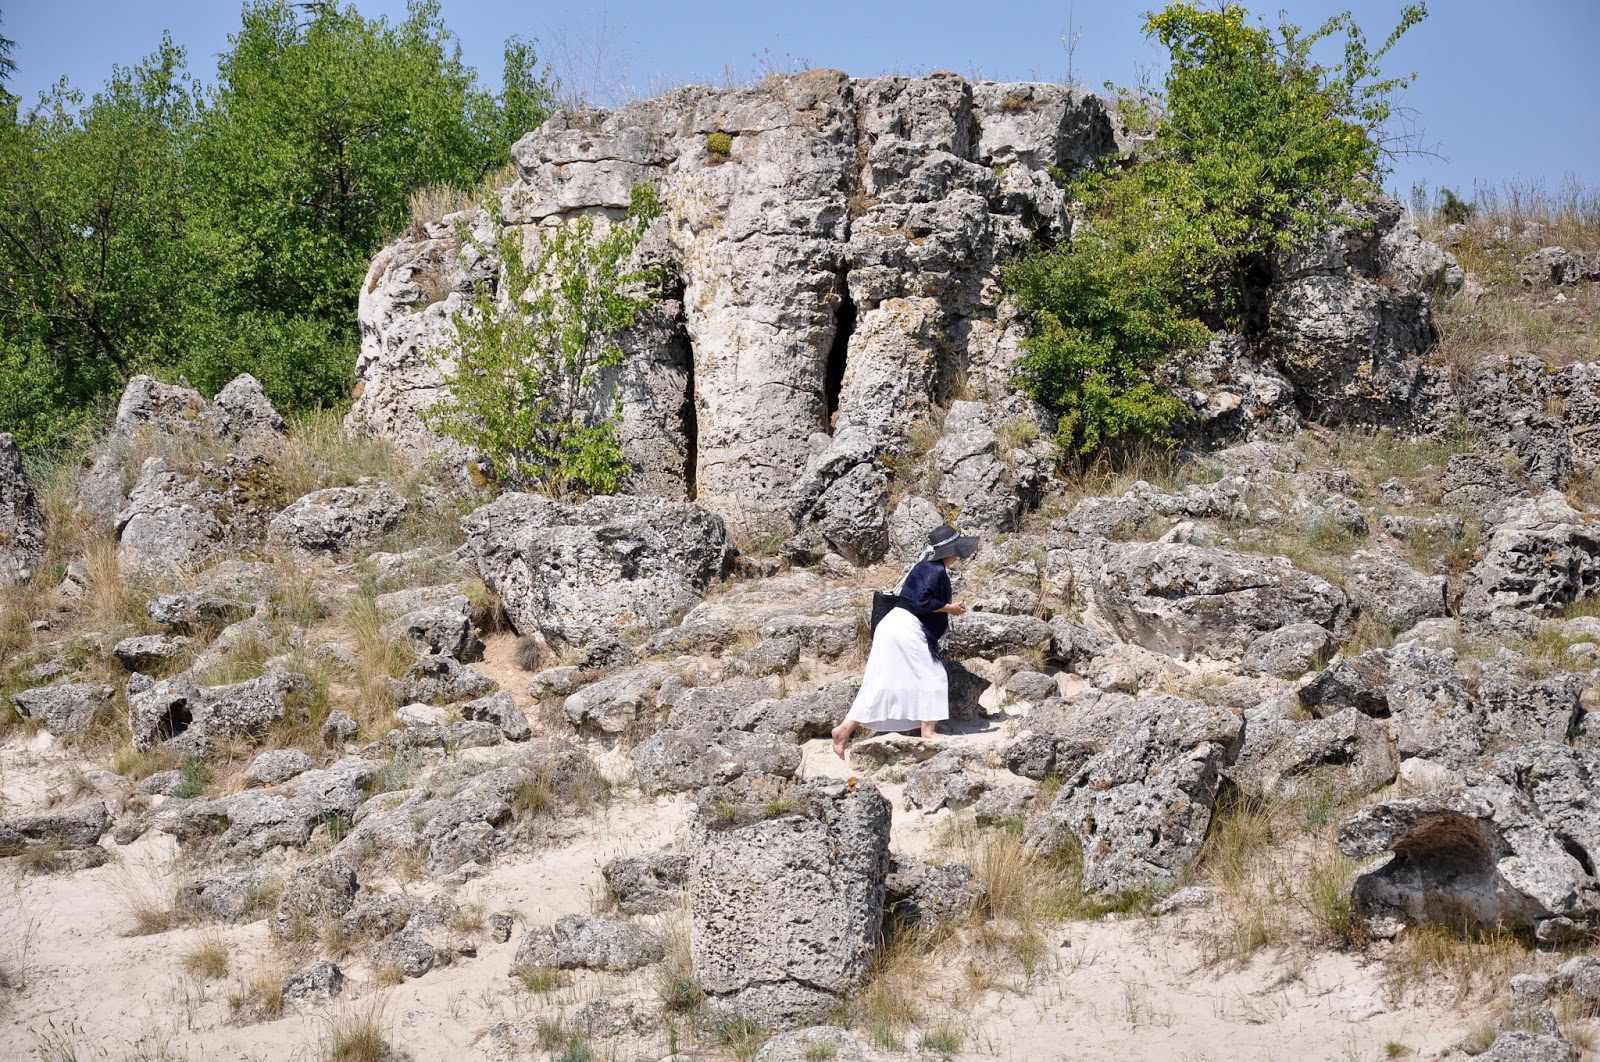 A tourist in The Stone Forest, Varna, Bulgaria